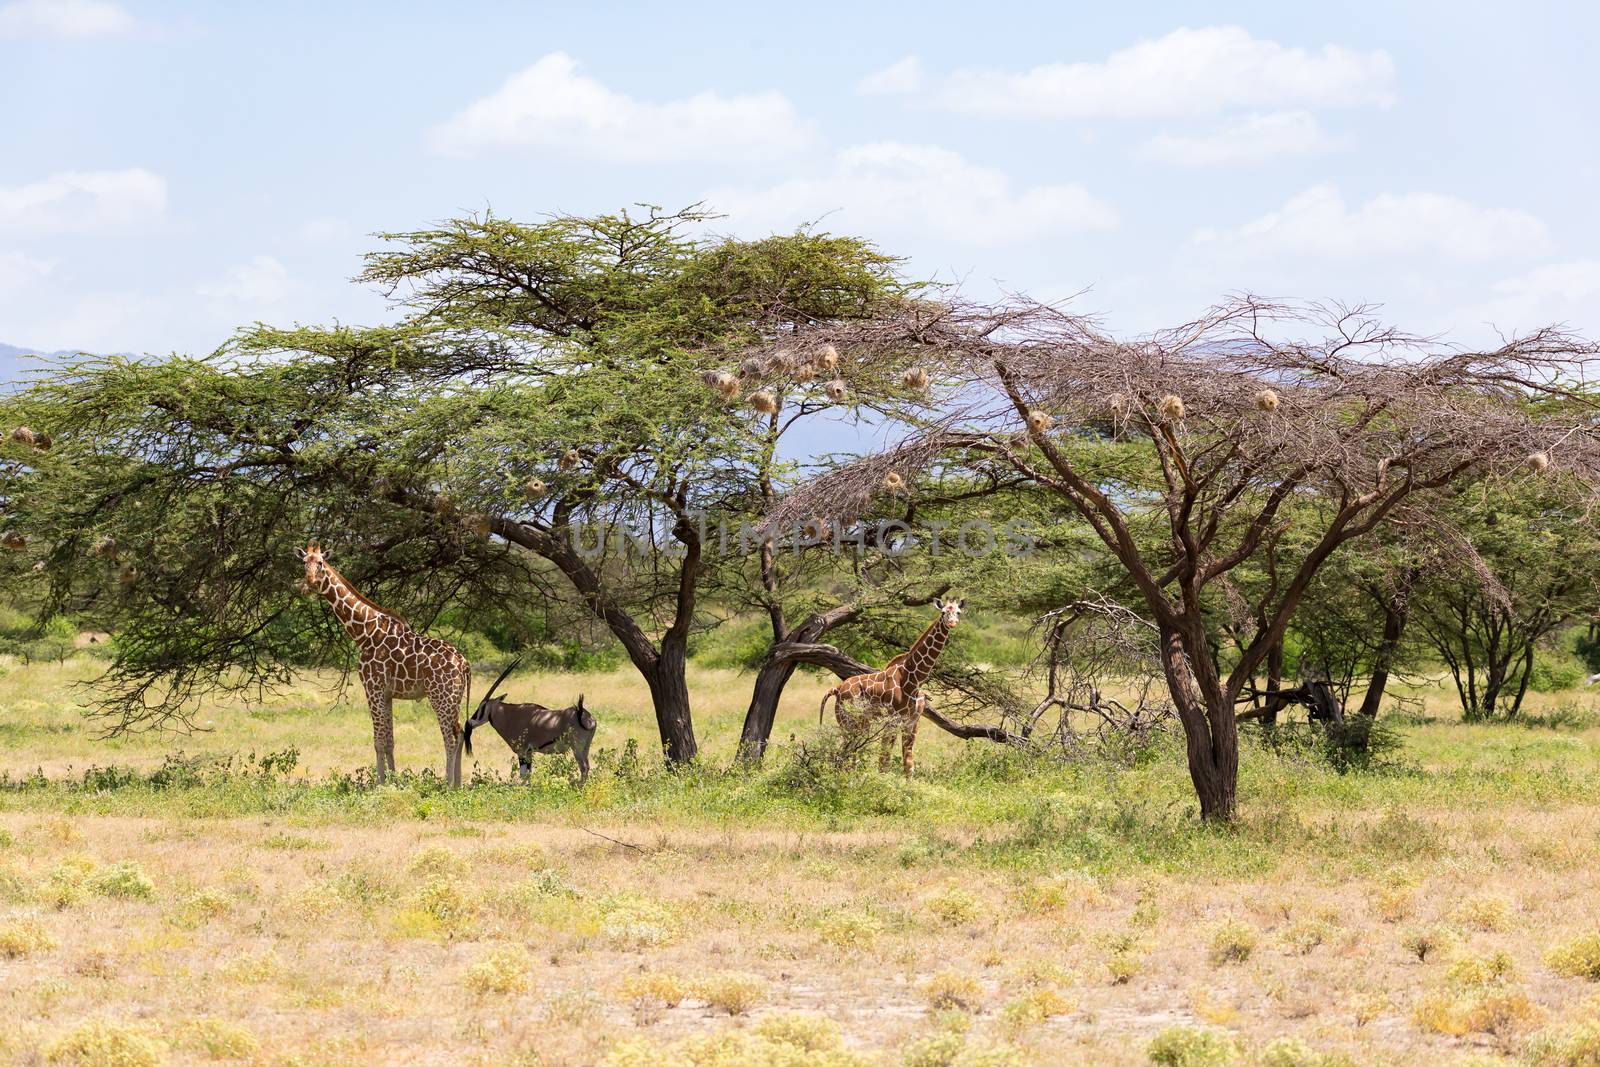 A giraffes and antelopes are standing together under a tree